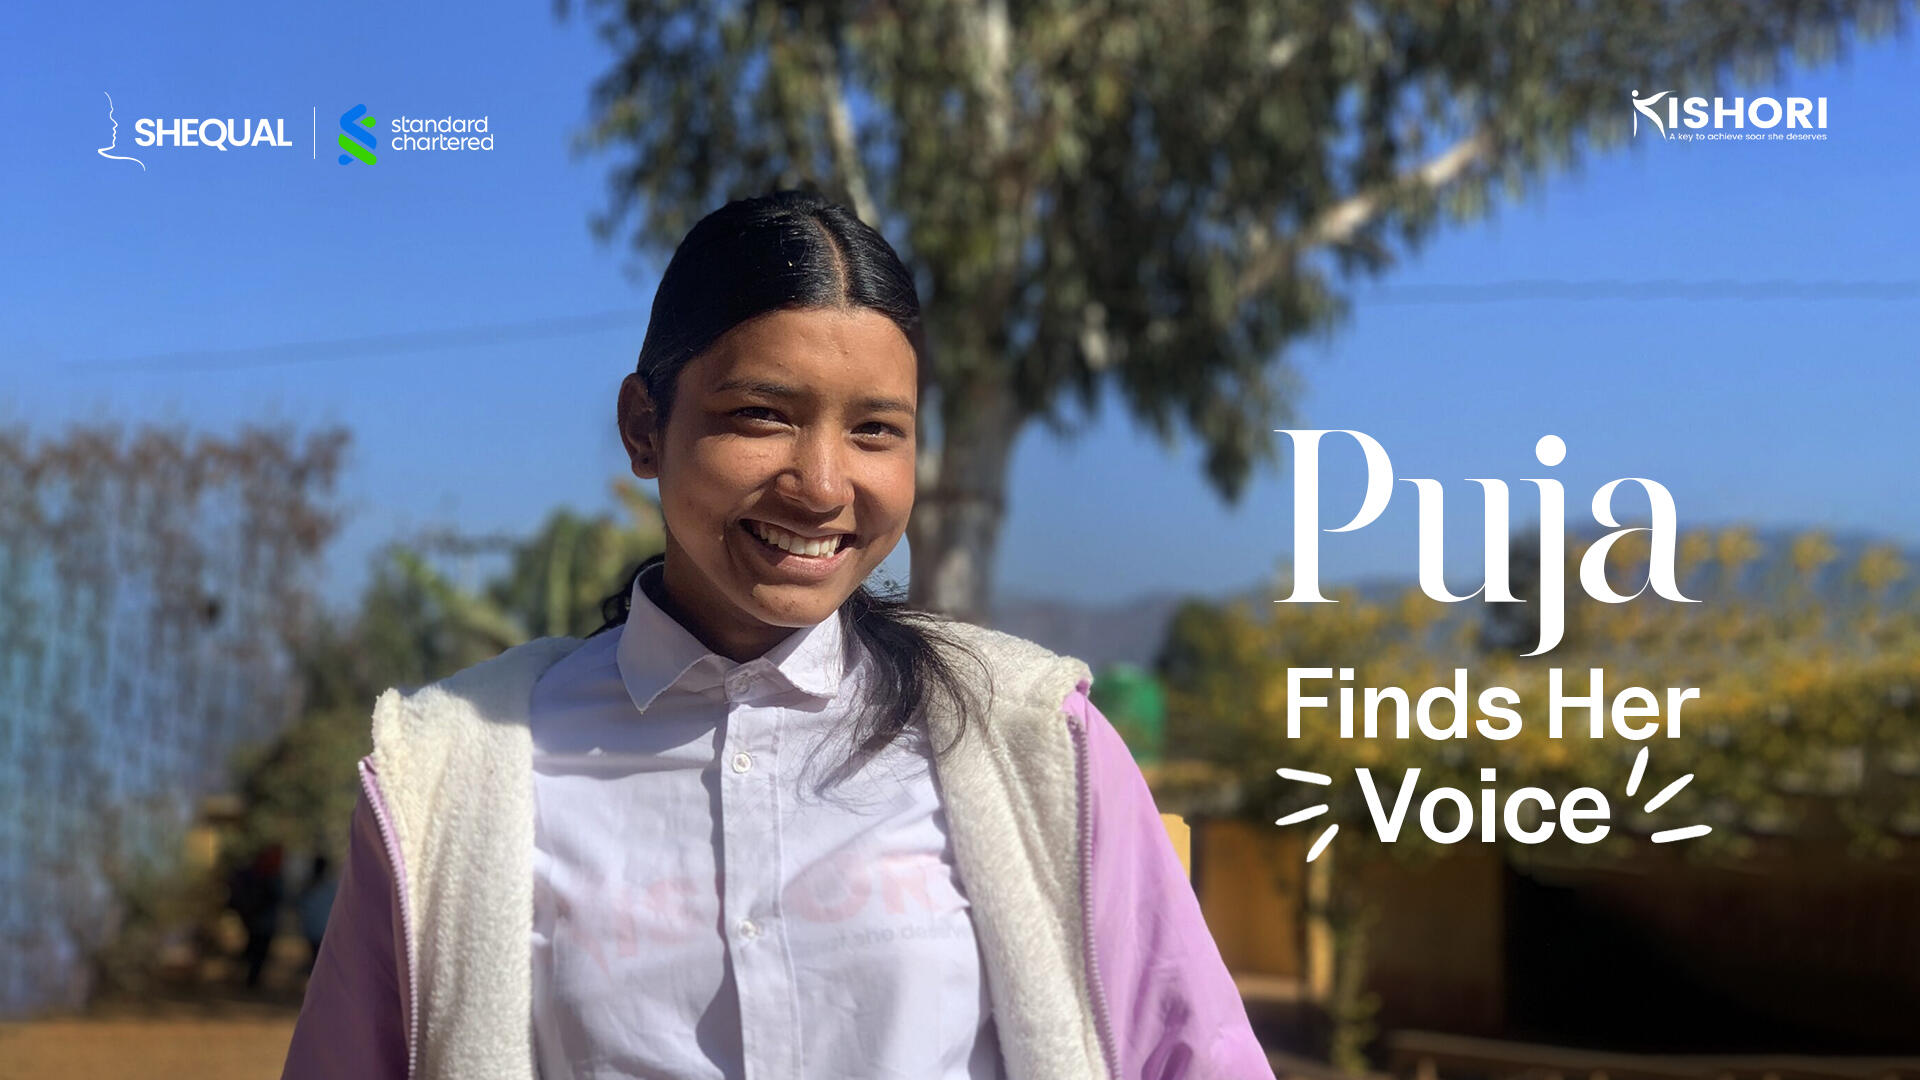 PUJA FINDS HER VOICE